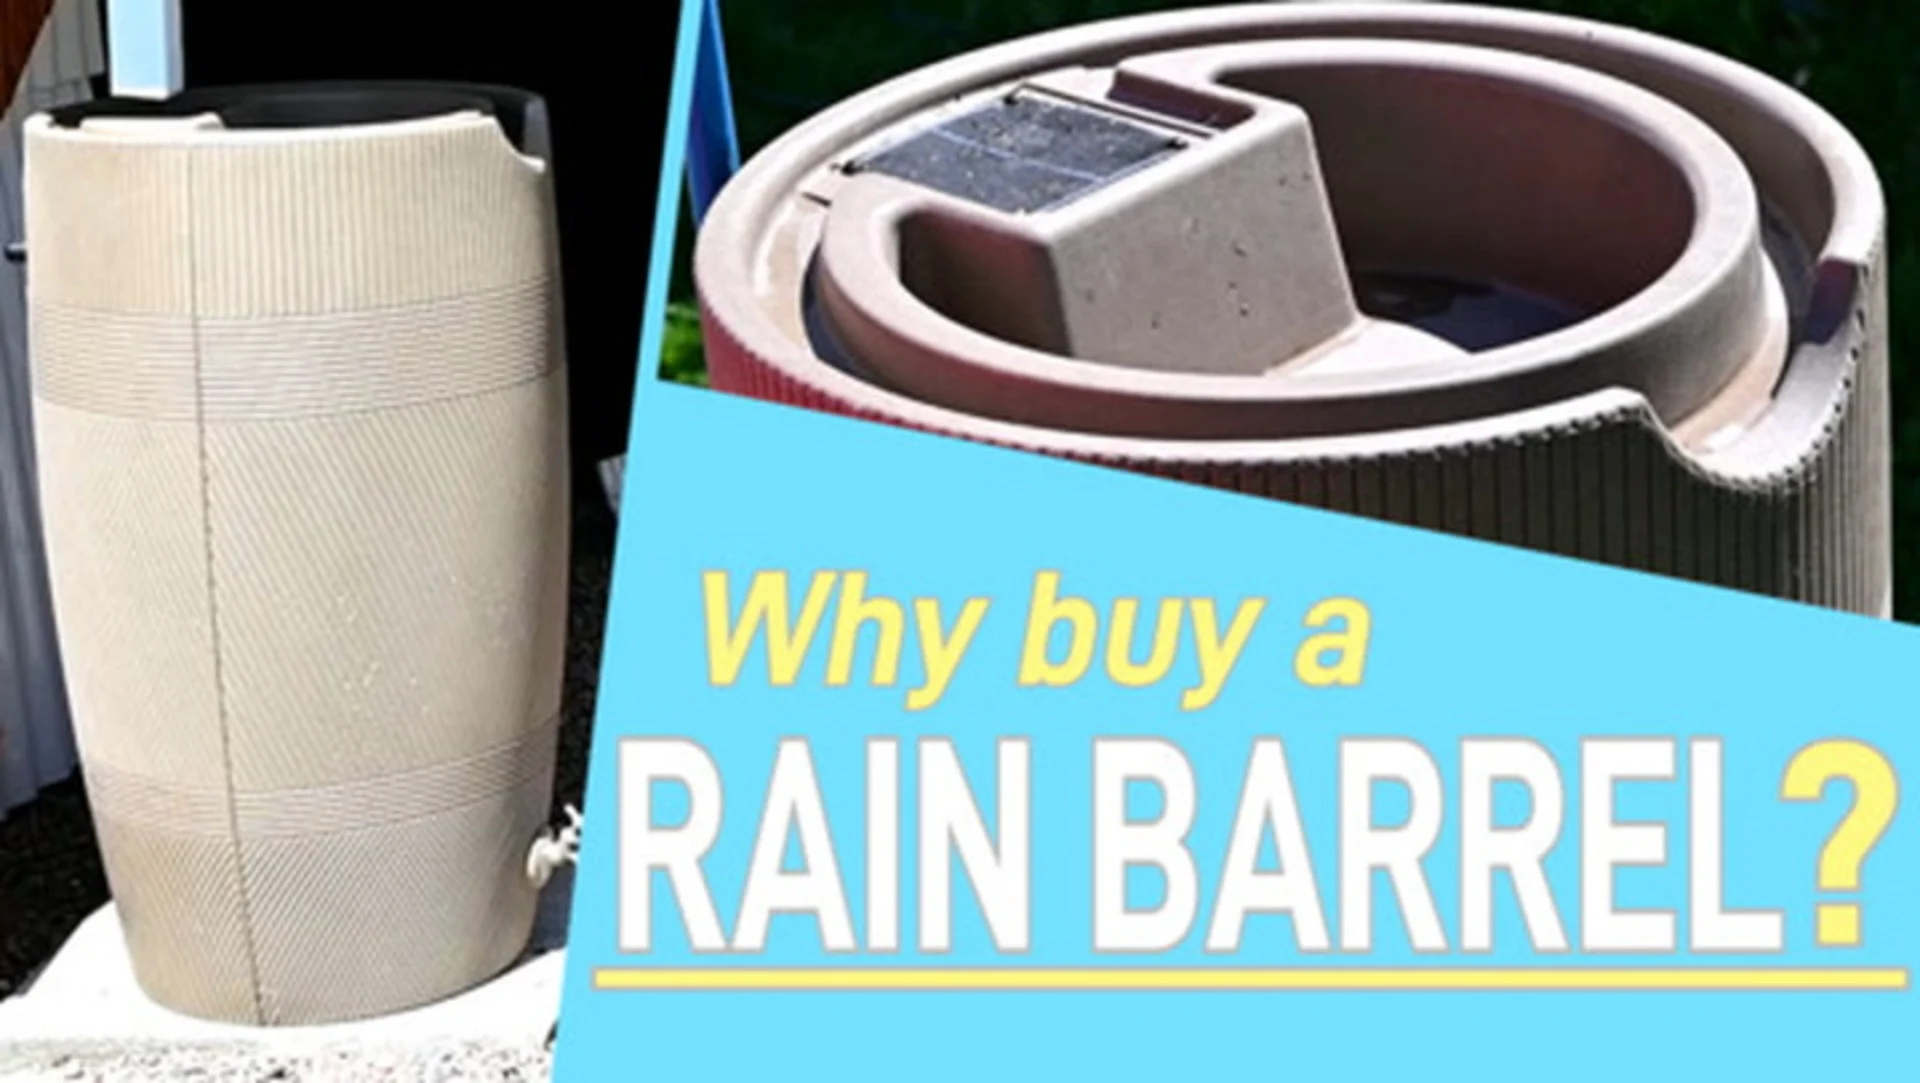 Up your gardening game with a rain barrel